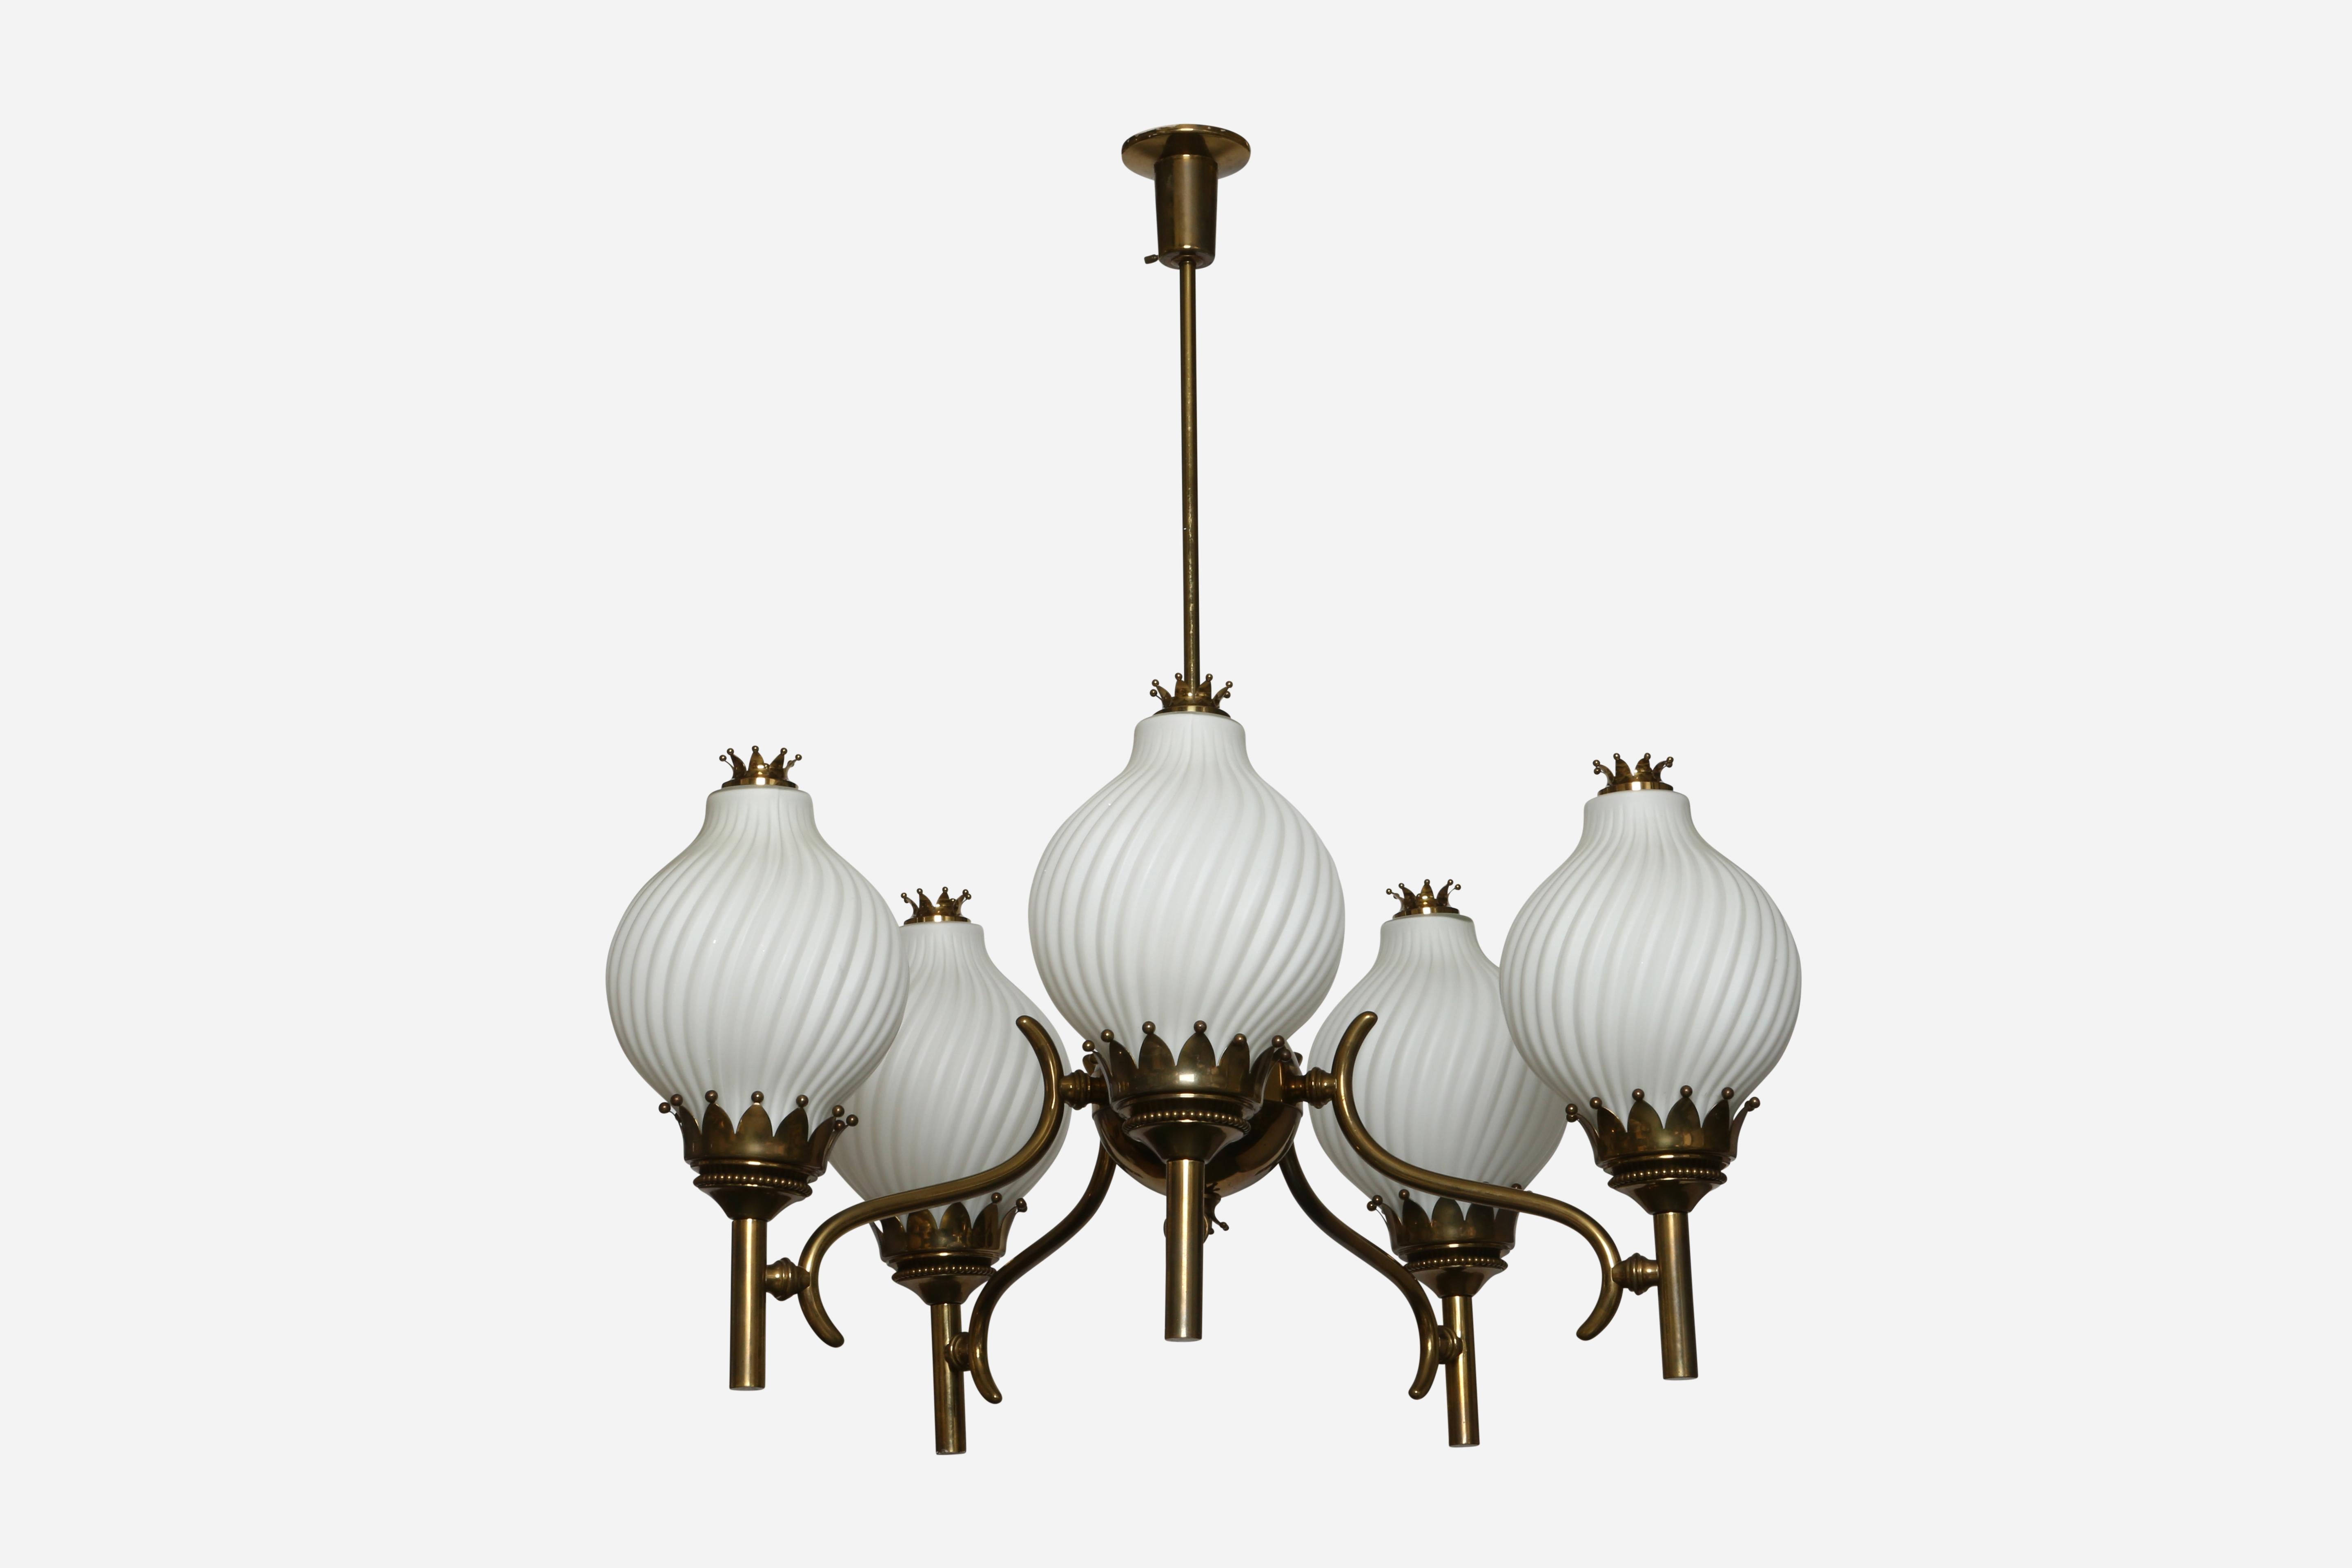 Angelo Lelii for Arredoluce chandelier.
Model Tortiglioni
Rare, large and very impressive.
5 big shades, 13 inches in height each.
Warm brass patina
Takes 5 medium base bulbs.
Complimentary US rewiring upon request.
Overall drop adjustable.
Can be